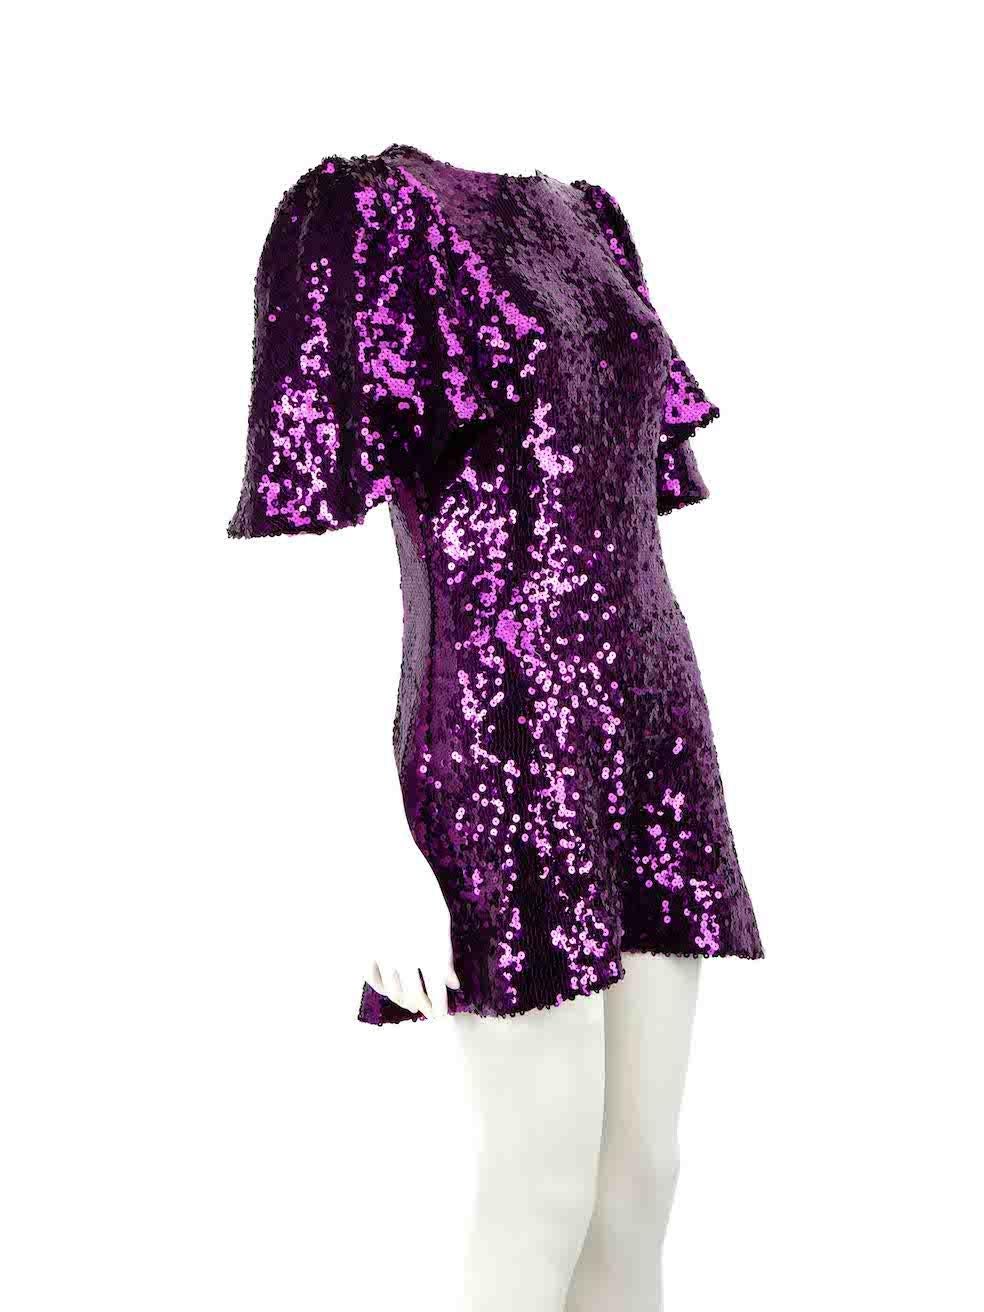 CONDITION is Never worn, with tags. No visible wear to dress is evident on this new The Vampire's Wife designer resale item.
 
 
 
 Details
 
 
 The Mini Night Tremors model
 
 Purple
 
 Polyester
 
 Mini dress
 
 Sequinned
 
 Round neckline
 
